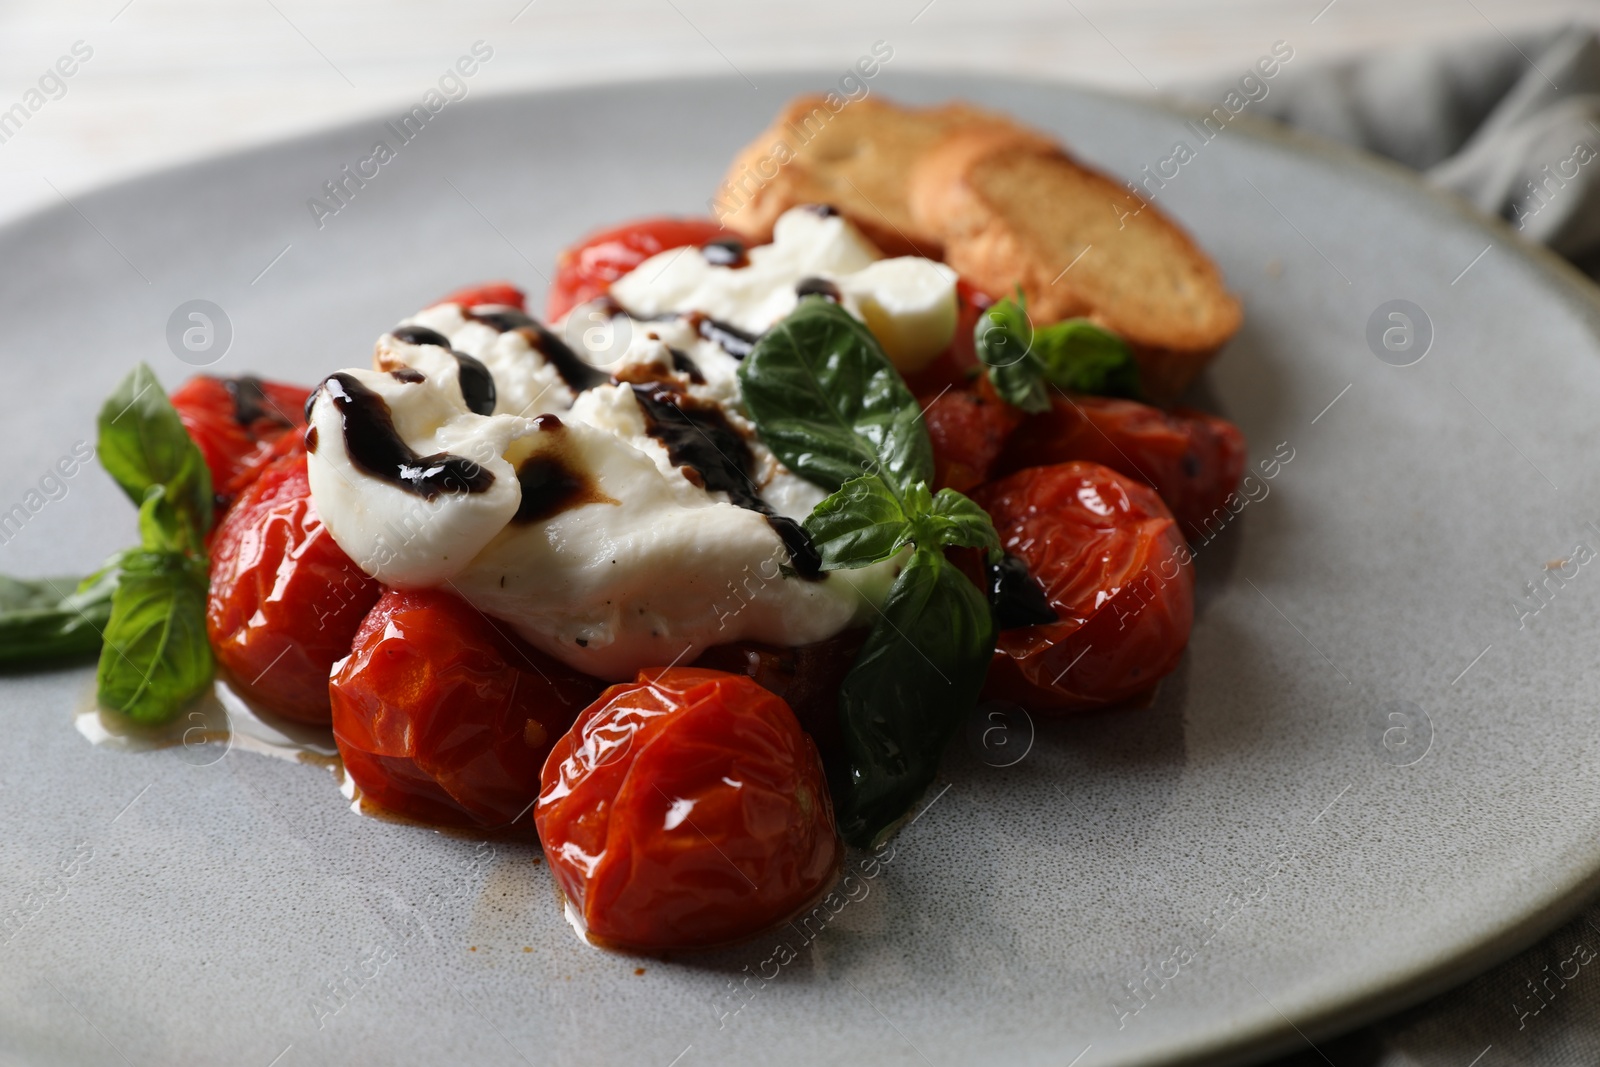 Photo of Delicious burrata cheese served with tomatoes, croutons and basil sauce on plate, closeup